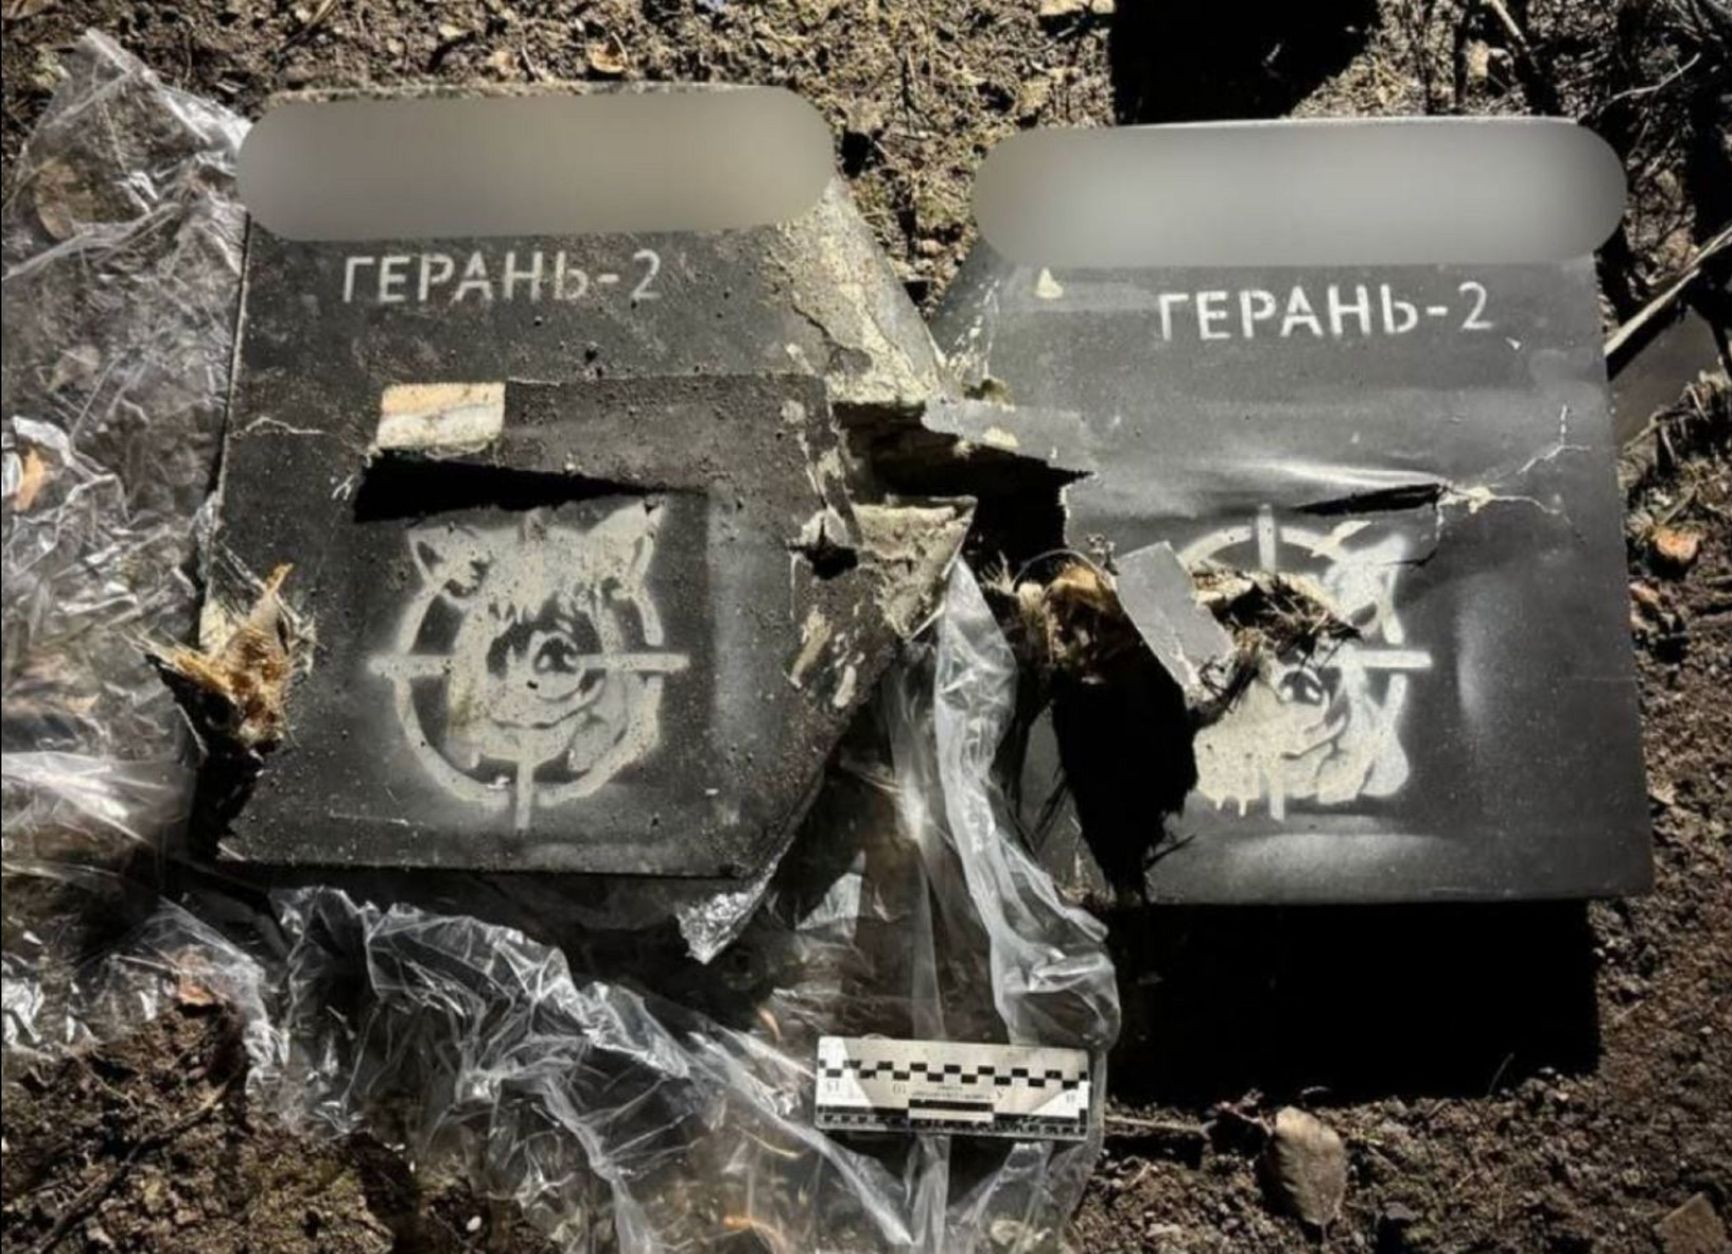 Debris of Shahed-type drones with graphic messages from Russian servicemen.